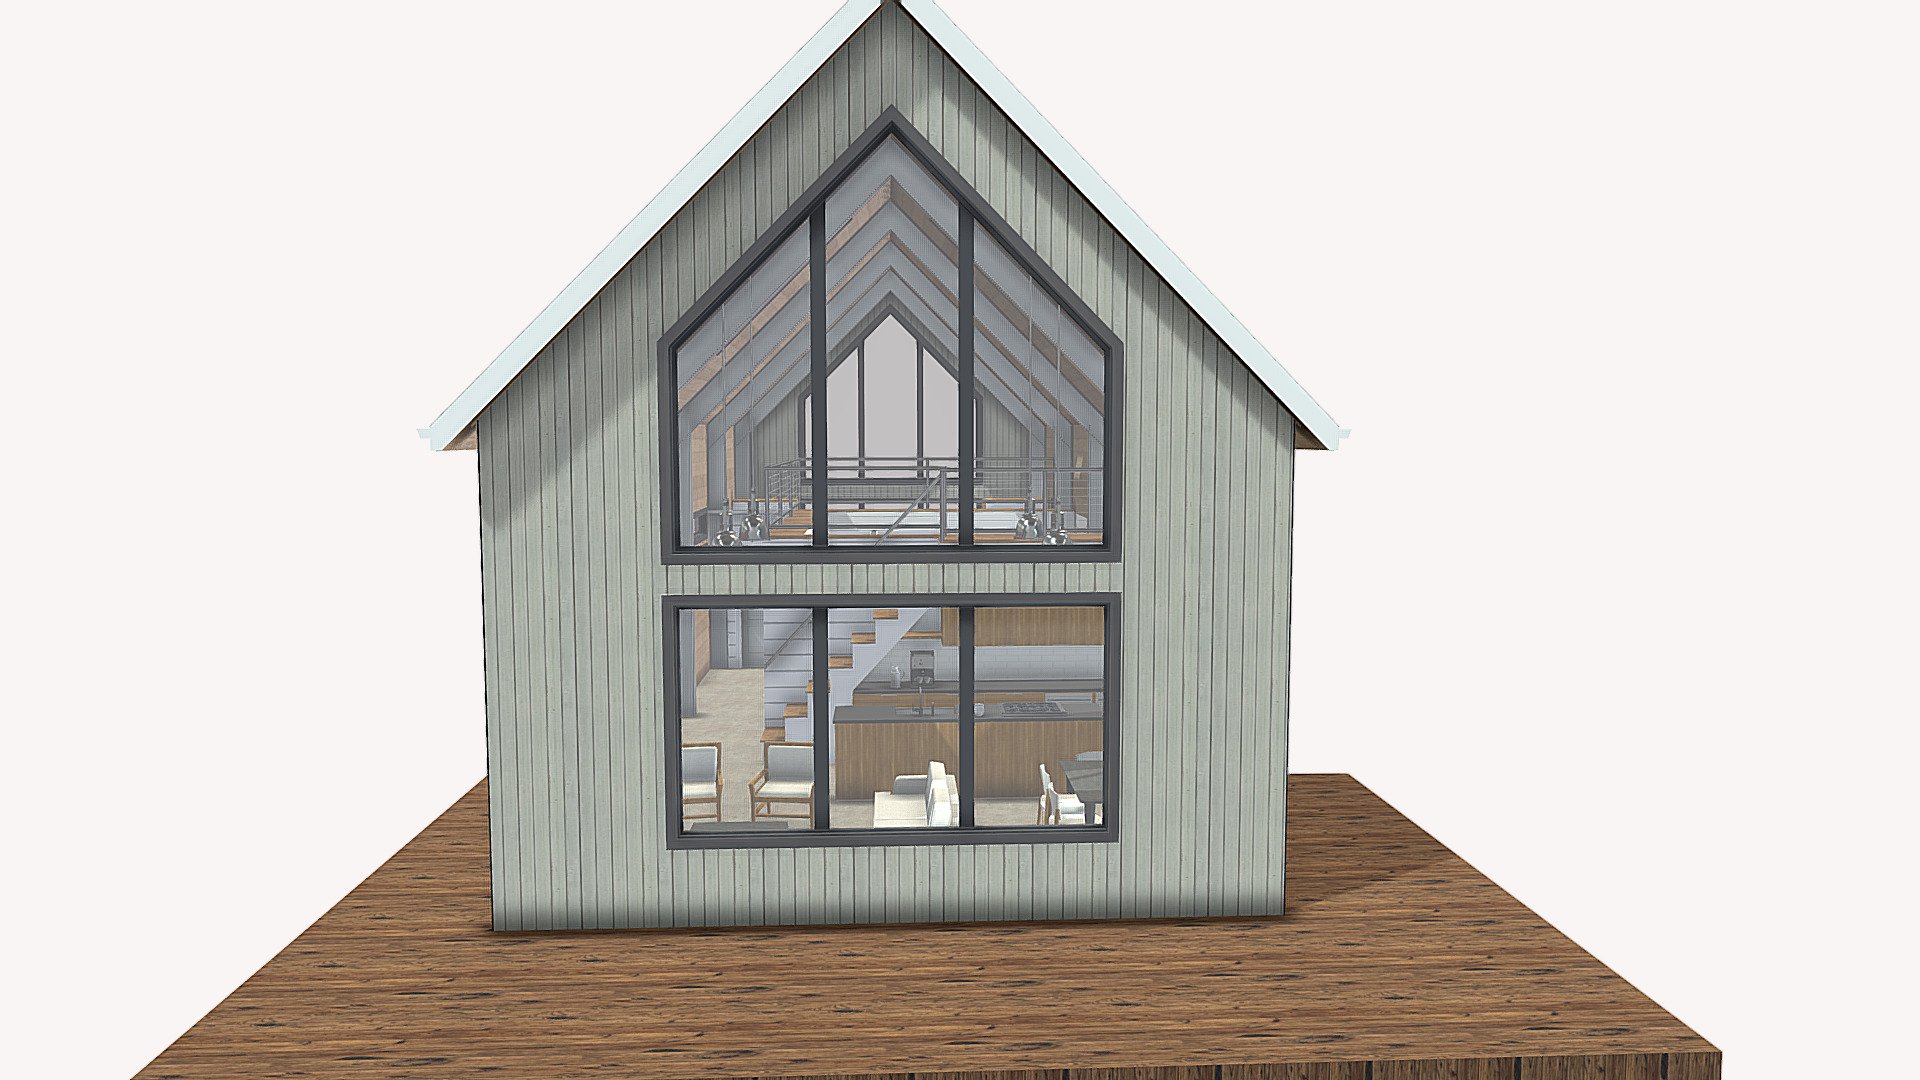 Modern designed home with uban industrial elements.  Design is suited for both an urban or rural environment.  Two bedroom, one and a half bathrooms.  The loft space is intentionally transparent so the rooms below can be viewed. Concrete floors with radiant heating throughout. Steel I-beam frame construction 3d model